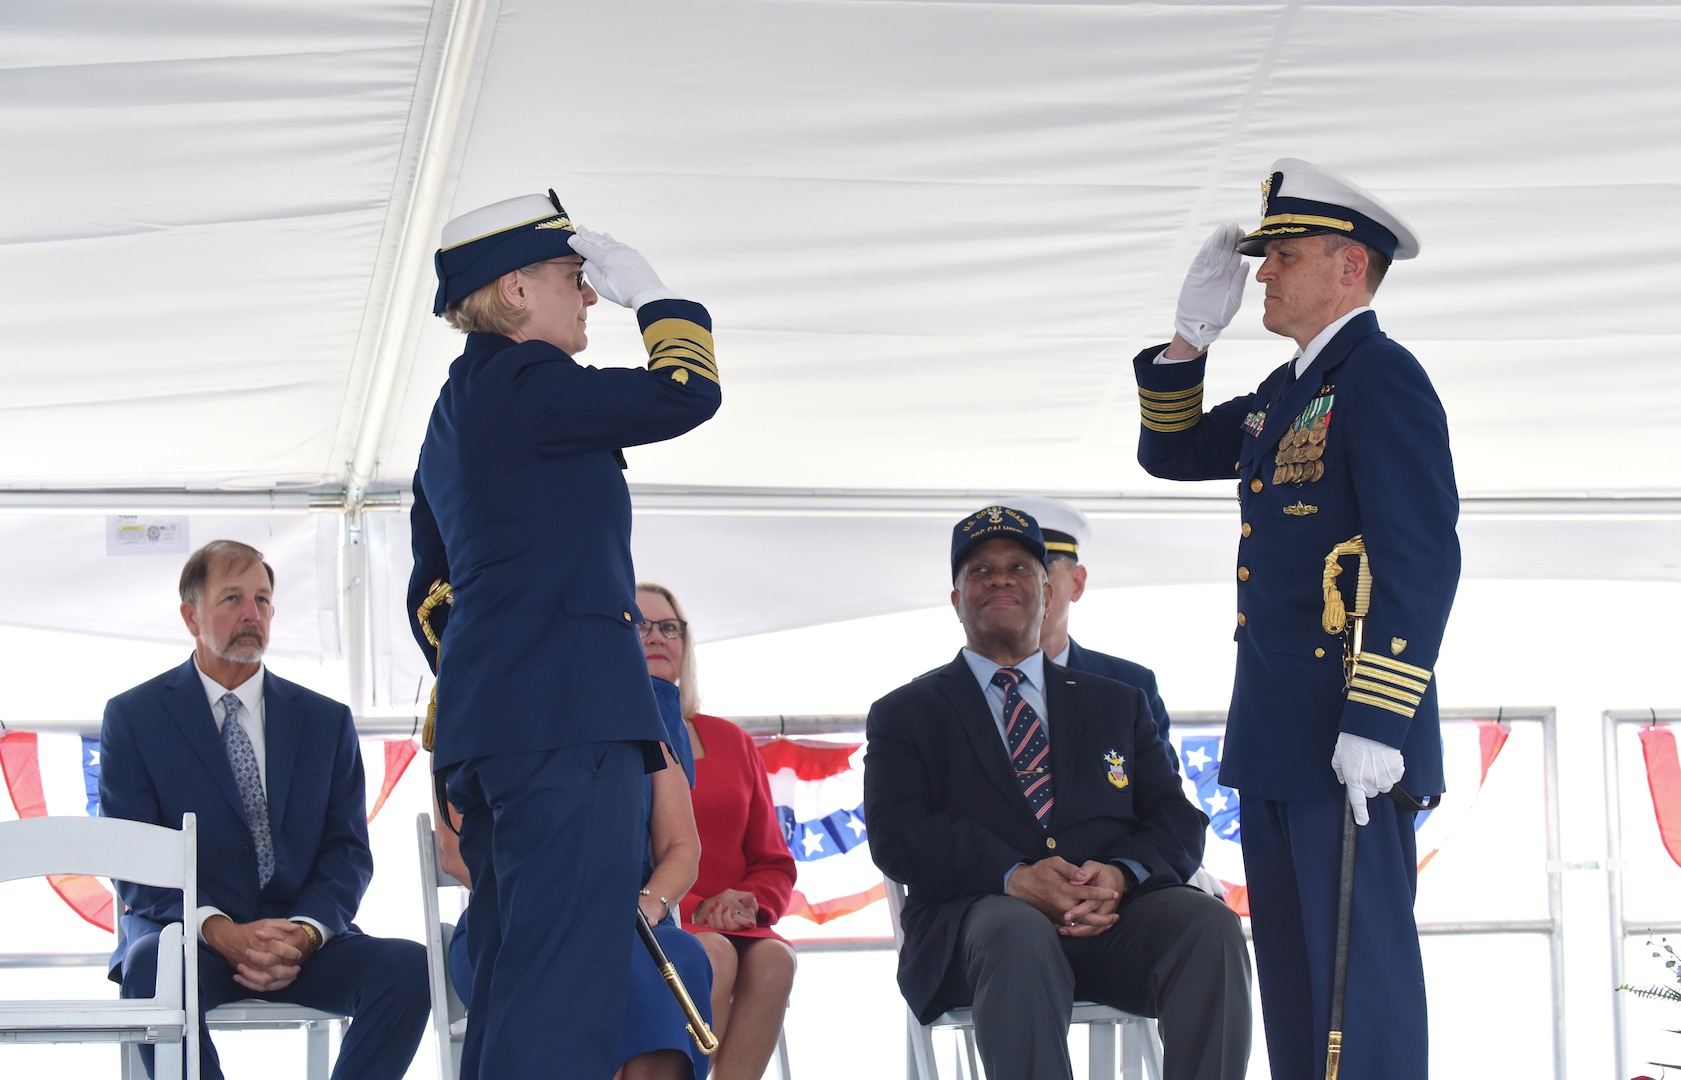 Coast Guard Commandant Adm. Linda Fagan and Capt. Timothy Sommella, commanding officer of U.S. Coast Guard Cutter Calhoun (WMSL 759), salute one another during the cutter's commissioning ceremony, April 20, 2024, in North Charleston, South Carolina. The Calhoun, which is named for the first Master Chief Petty Officer of the Coast Guard, Charles Calhoun, was commissioned into service as the 10th National Security Cutter. (U.S. Coast Guard photo by Petty Officer 2nd Class Brandon Hillard)